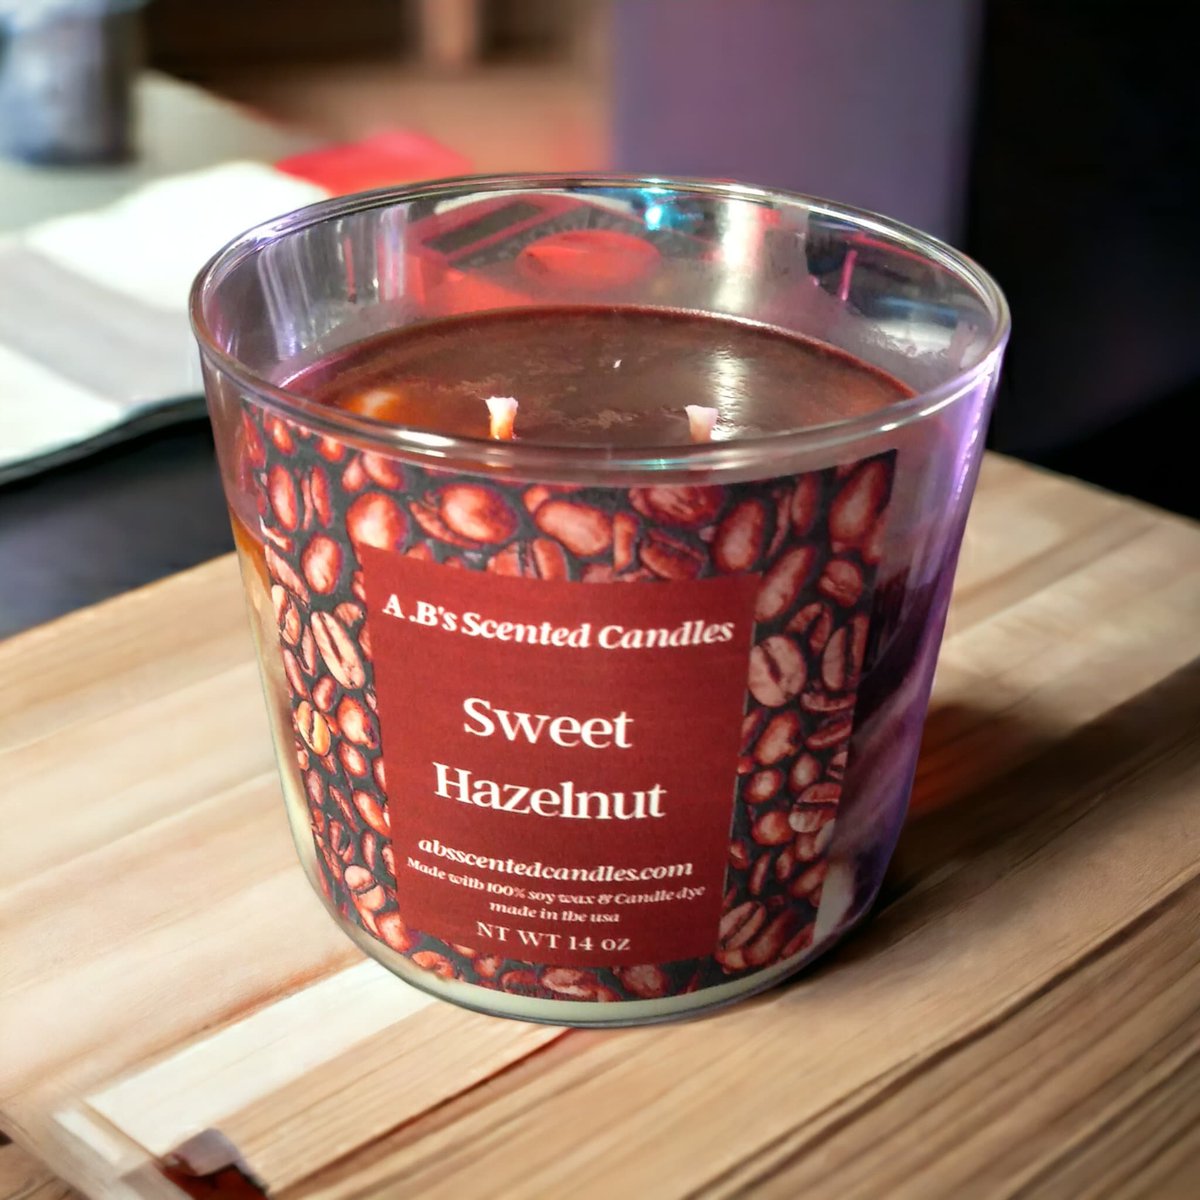 Excited to share the latest addition to my #etsy shop: Sweet Hazelnut etsy.me/3BNRoF8 #brown #soy #spicy #cotton #organicingredients #funnycandles #dessertcandles #candles #scentedcandles